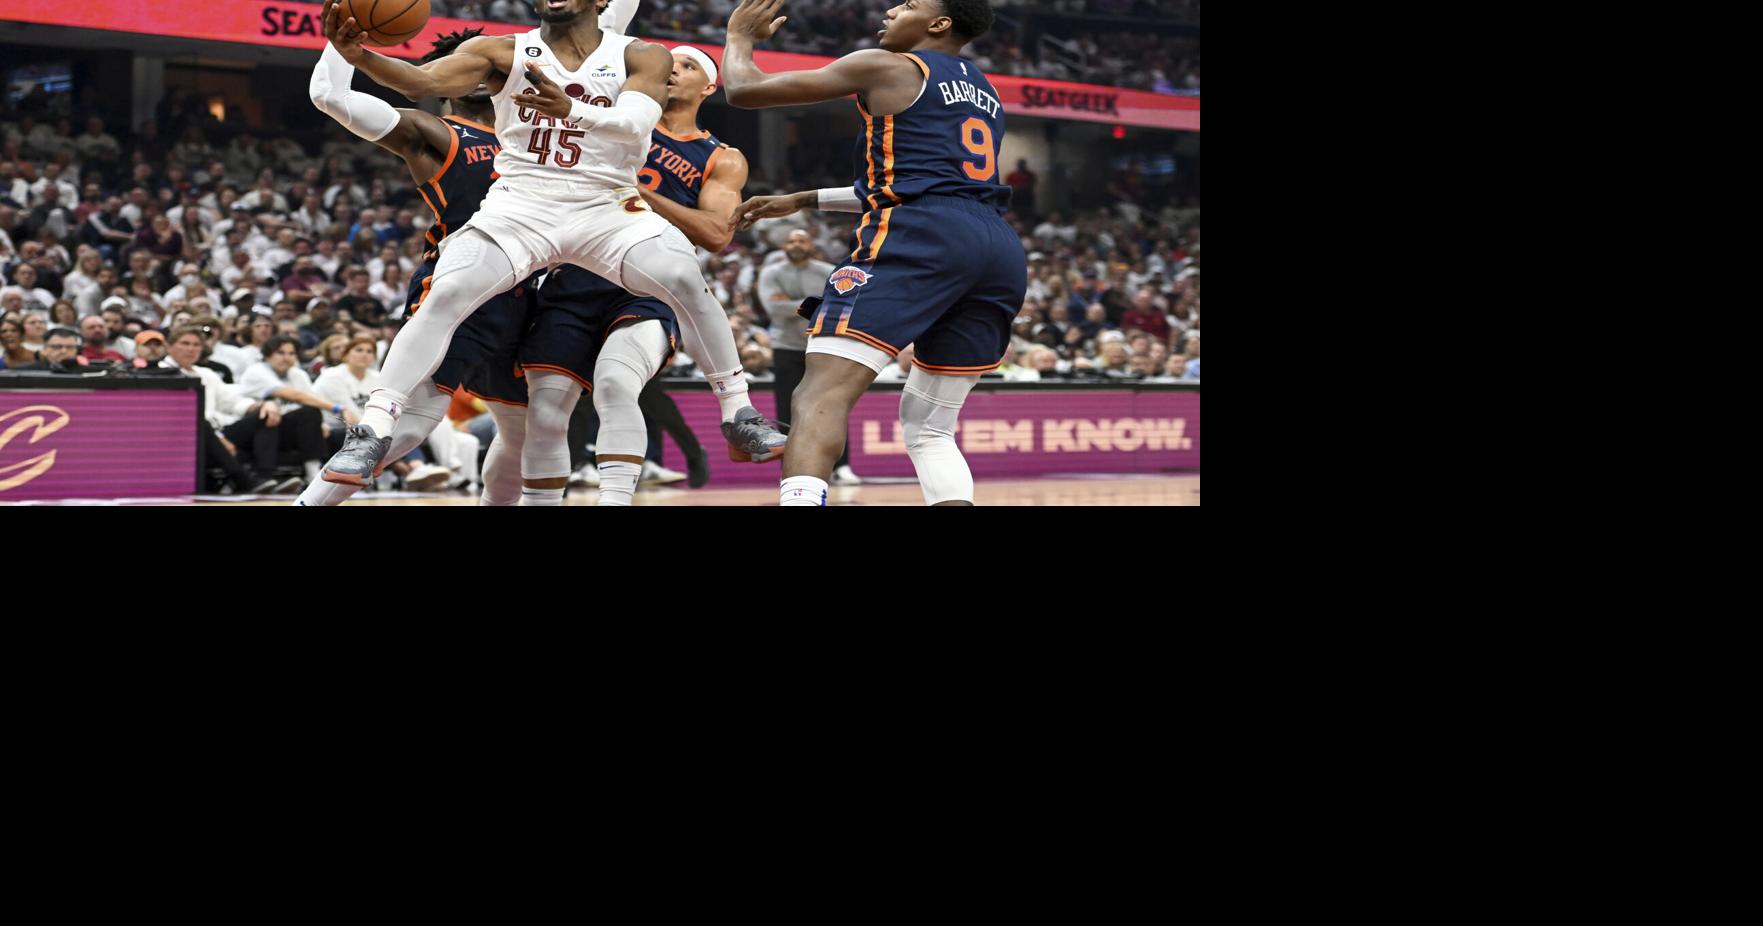 Bullied by Knicks in opener, Mitchell, Cavs look to rebound National News -  Bally Sports